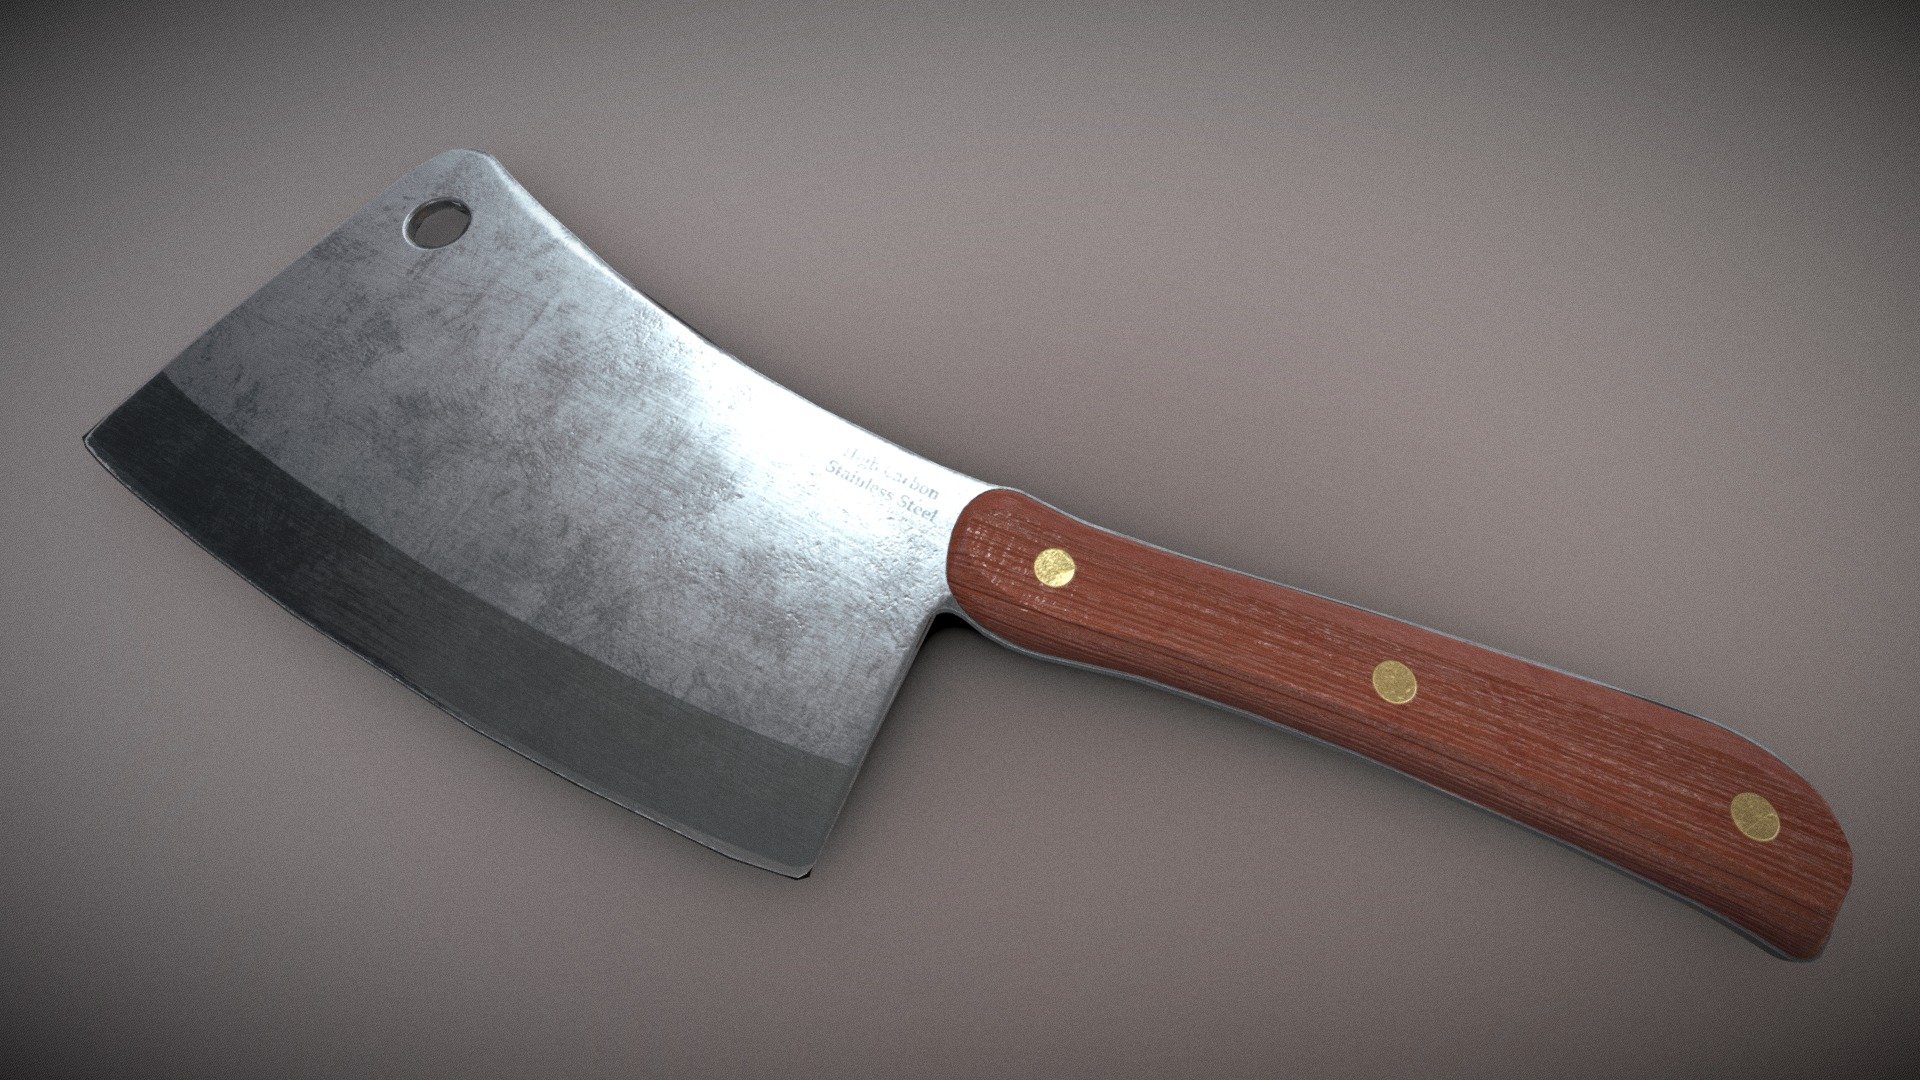 A butcher's cleaver with a bloody version. Part of a set I've recently started working on. Hope you enjoy!
Modeled and rendered in Blender 3.1.2. Textured in Substance Painter 6.1.1.

Includes FBX, Blend file, and 4k textures and alt textures 3d model